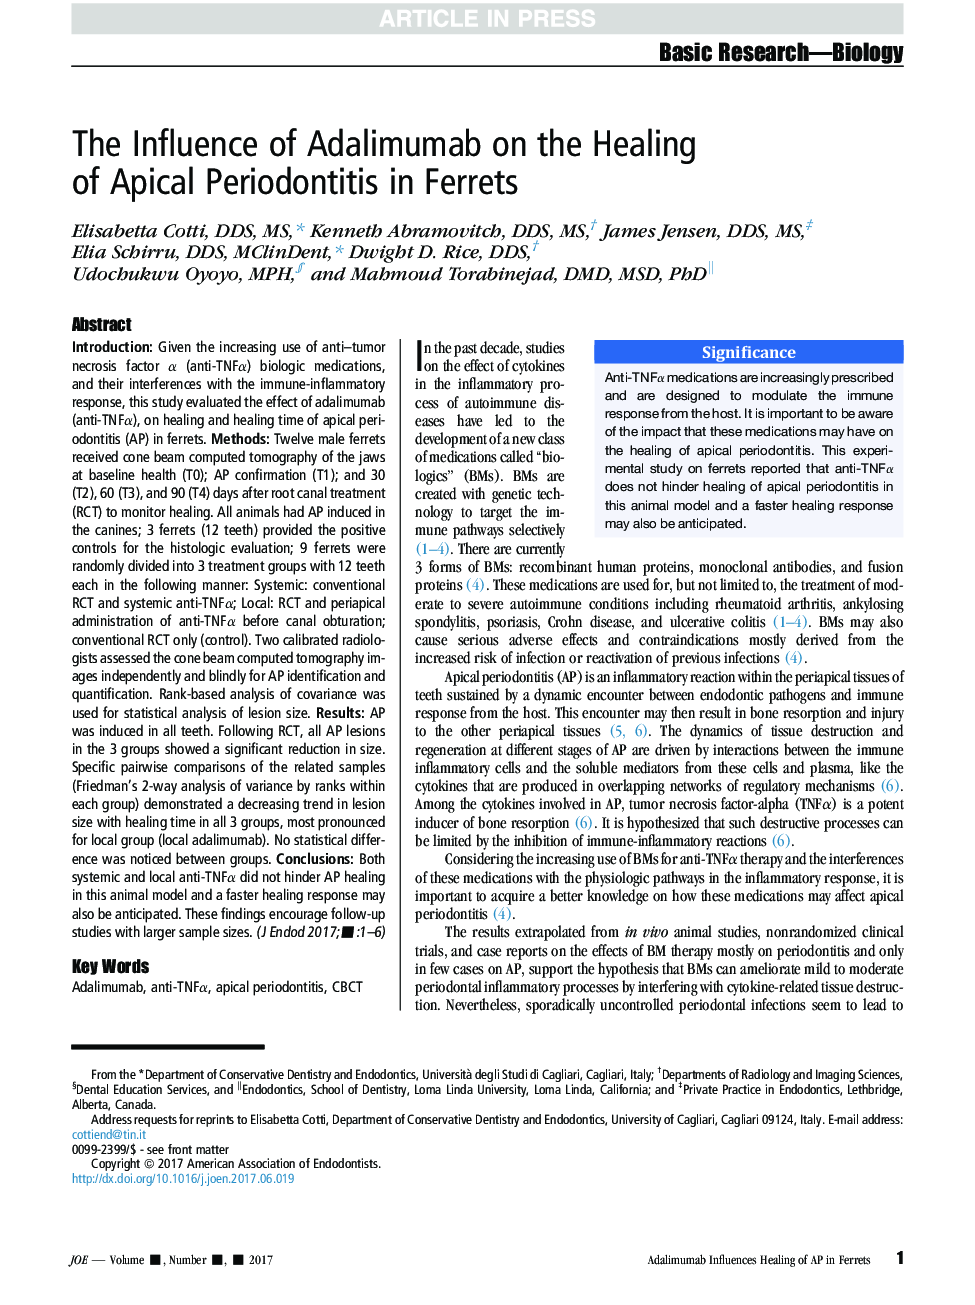 The Influence of Adalimumab on the Healing ofÂ Apical Periodontitis in Ferrets